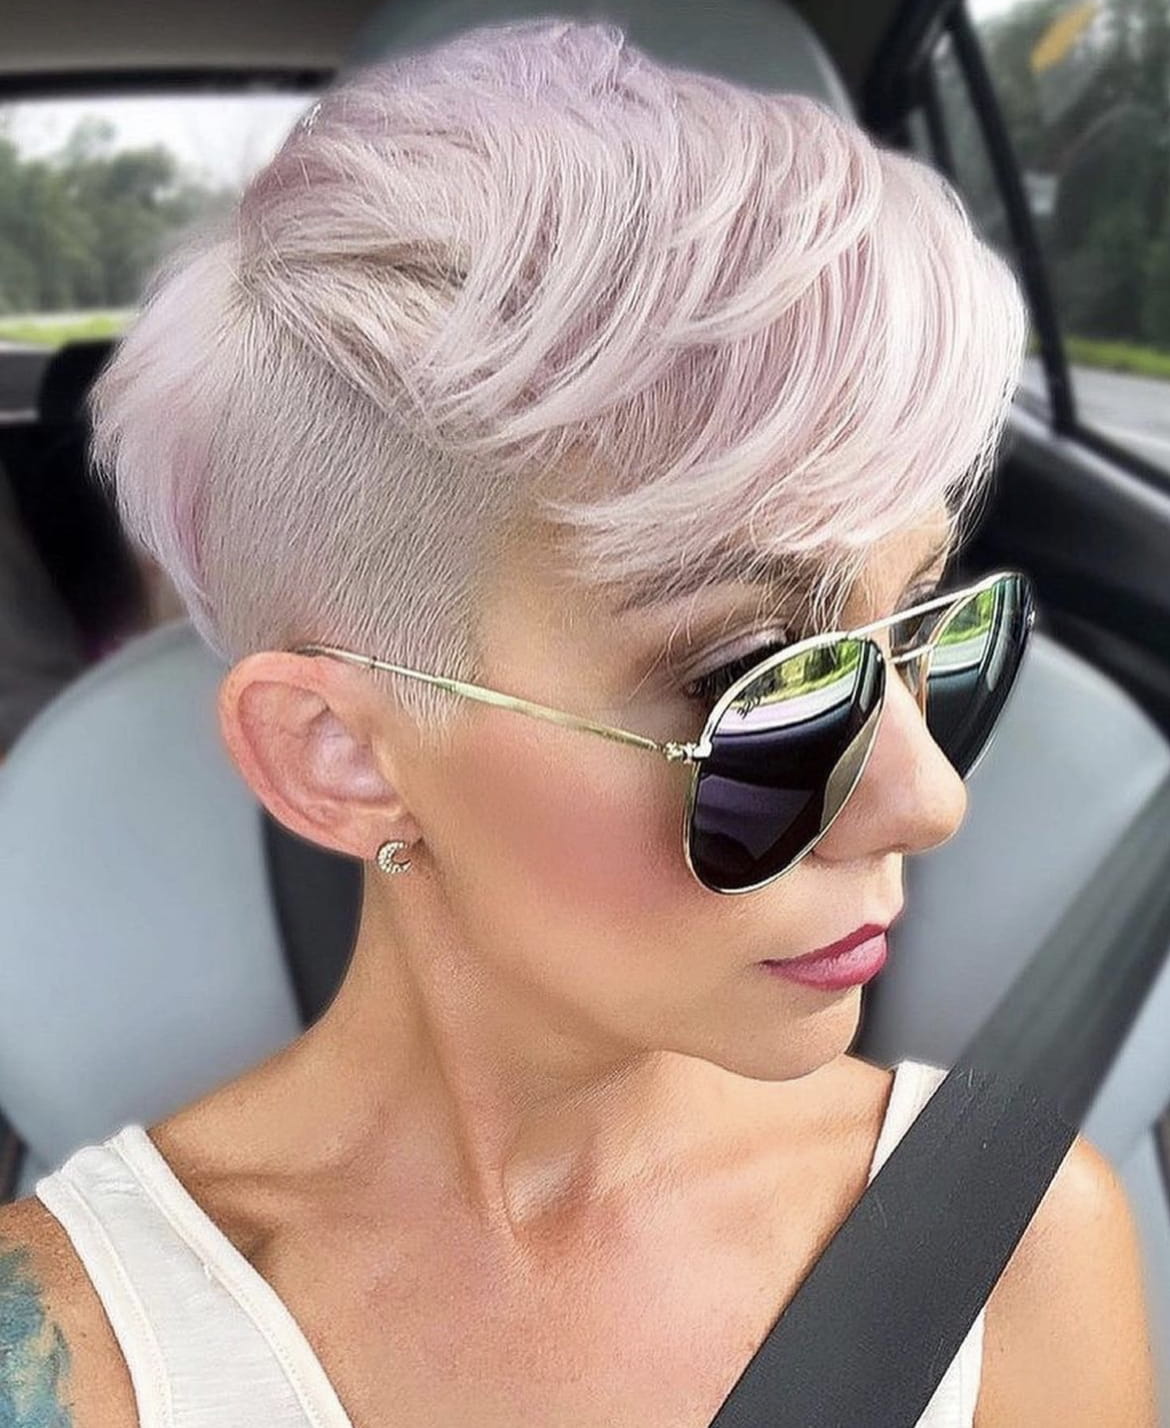 100+ Best Short Hairstyles & Haircuts For Women images 46